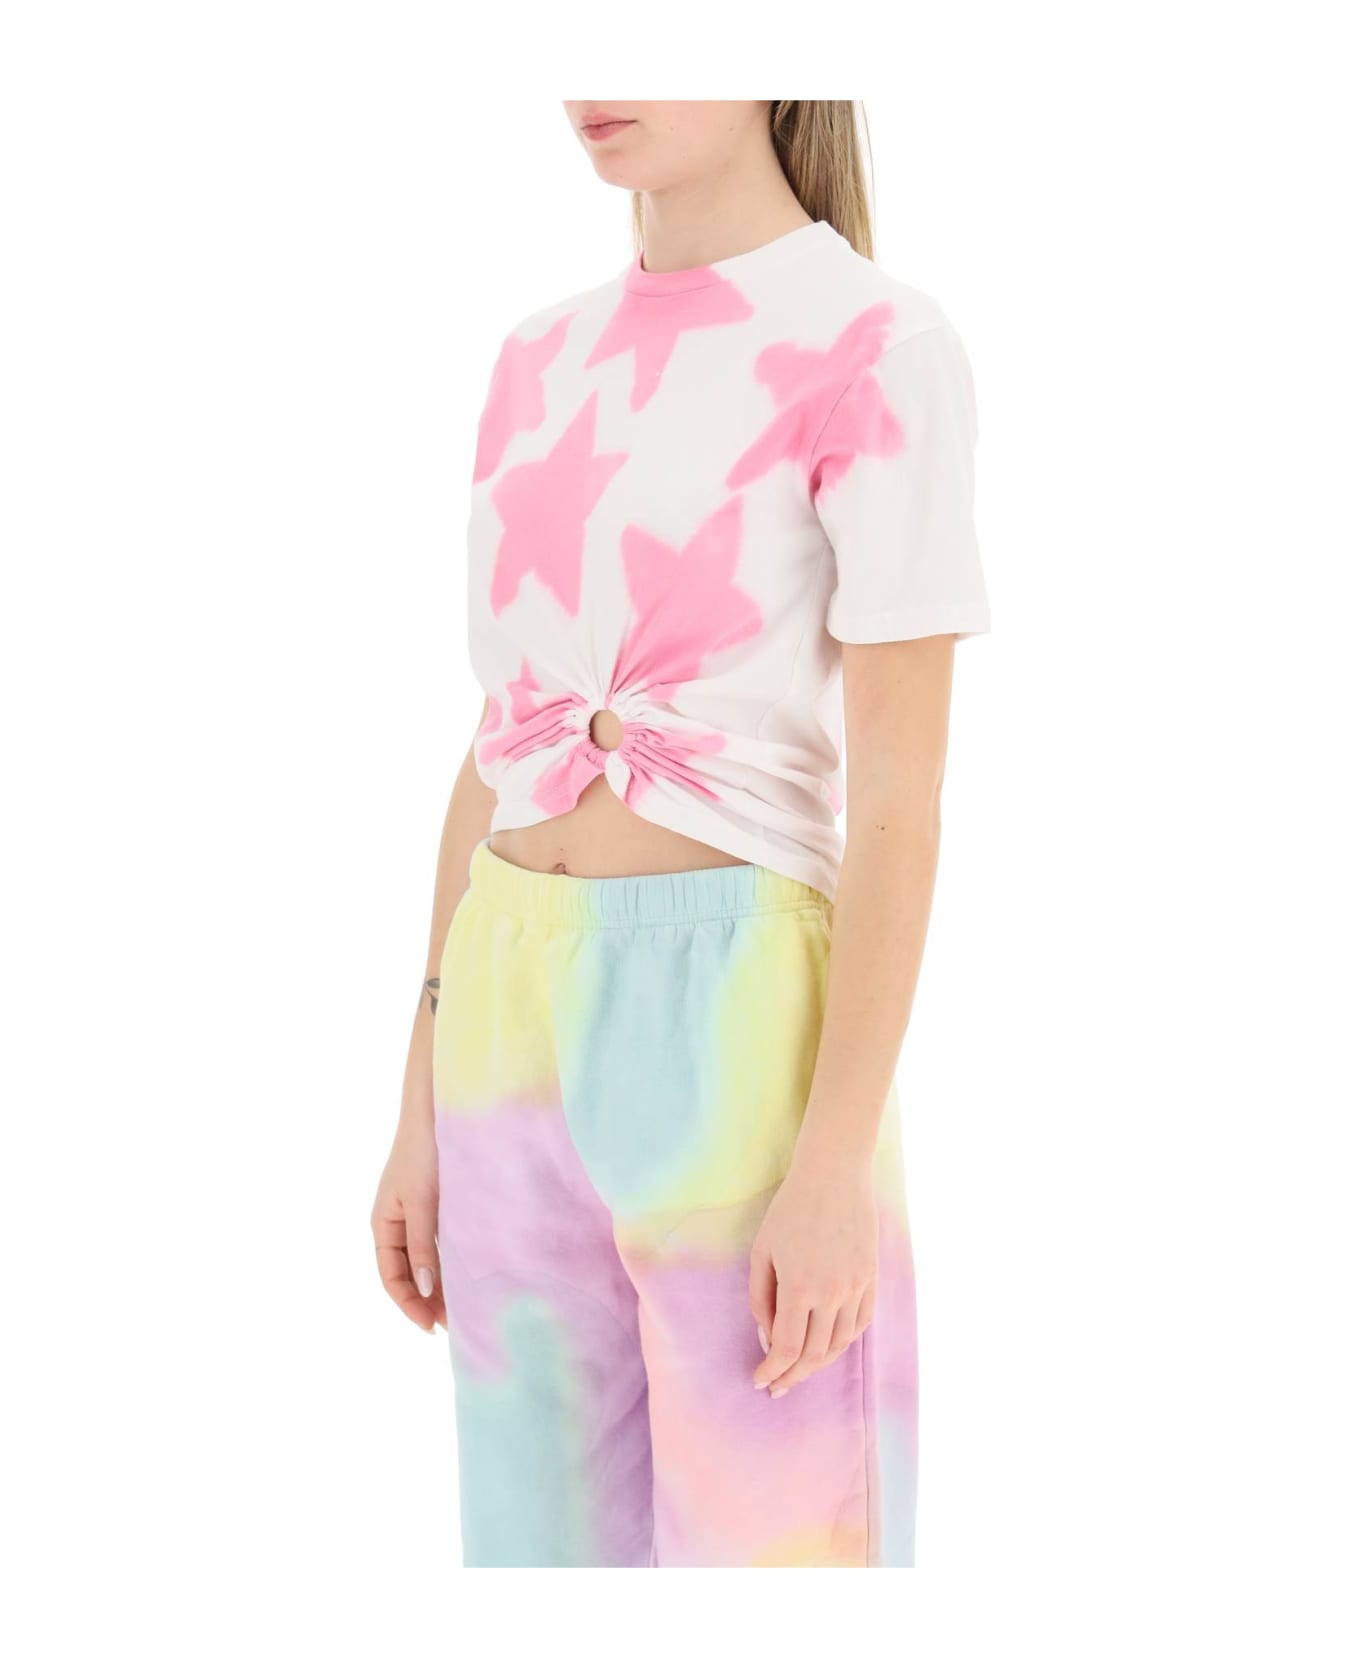 Collina Strada Tie-dye Star T-shirt With O-ring Detail - PINK STAR (White) Tシャツ